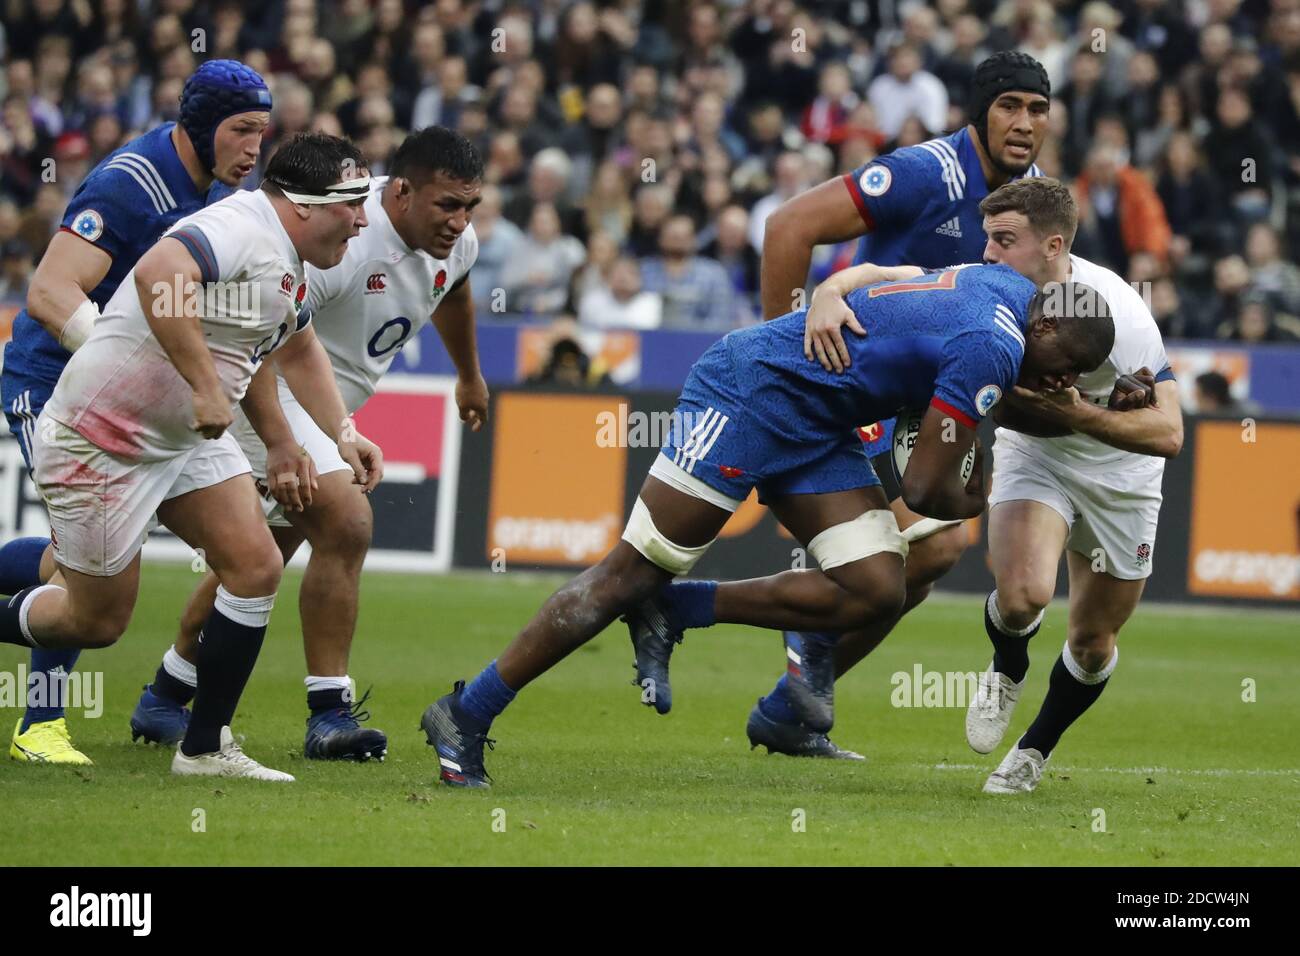 France's Yacouba Camara during Rugby Natwest 6 Nations Tournament, France  vs England in Stade de France, St-Denis, France, on March 10th, 2018. France  won 22-16. Photo by Henri Szwarc/ABACAPRESS.COM Stock Photo -